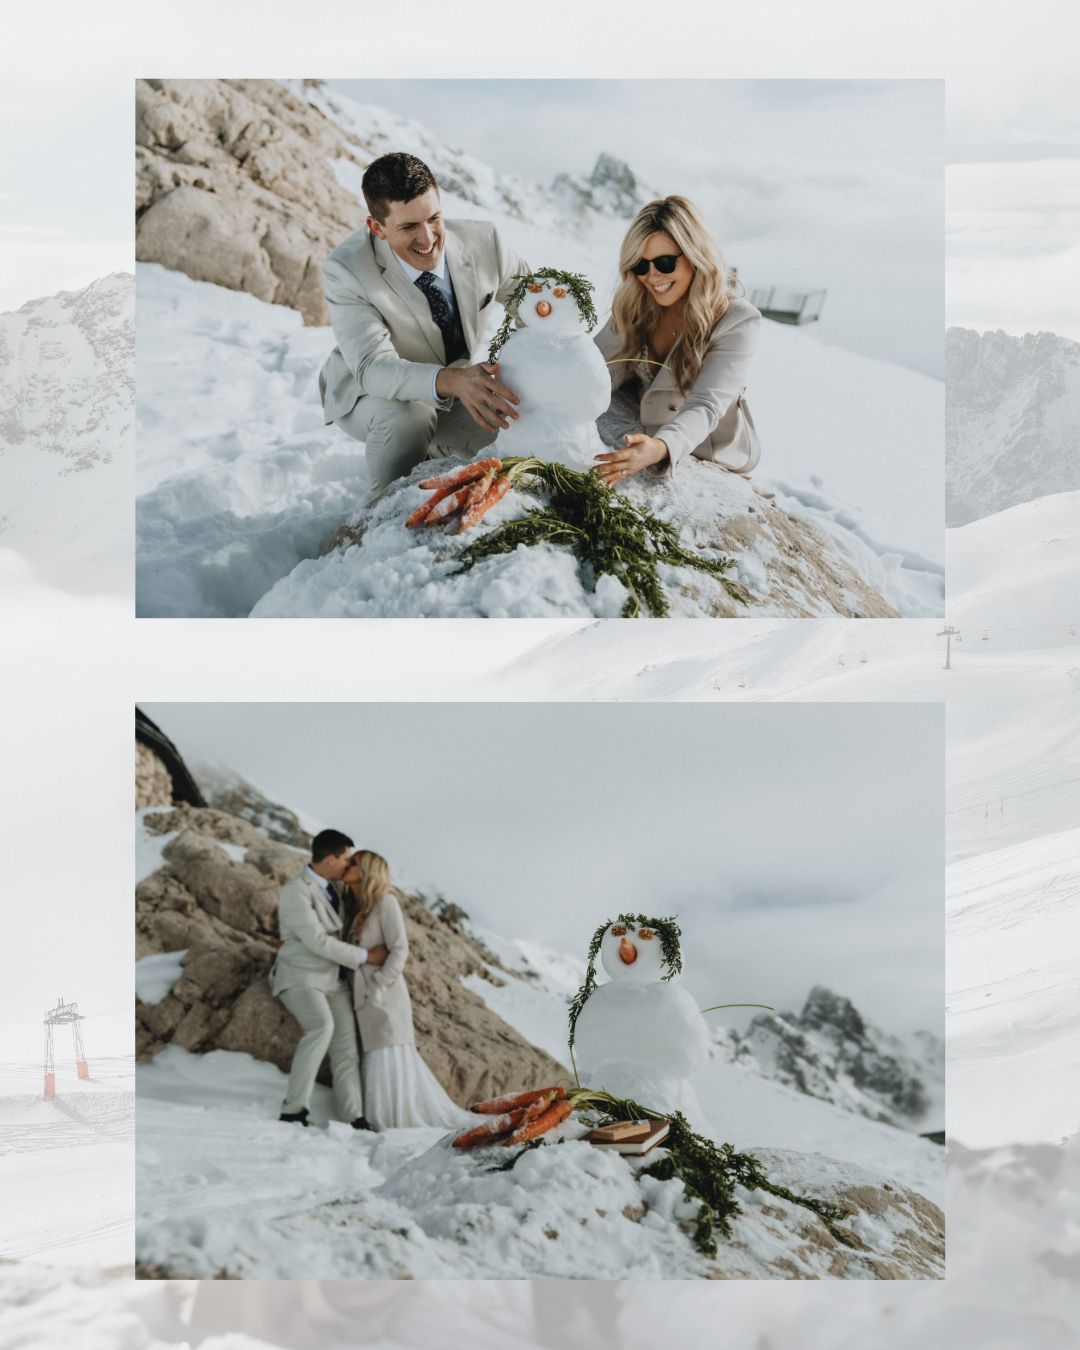 This is a collage of images of a couple building a snowman on top of the Zugspitze summit during their elopement day. They are wearing light colored wedding attire.